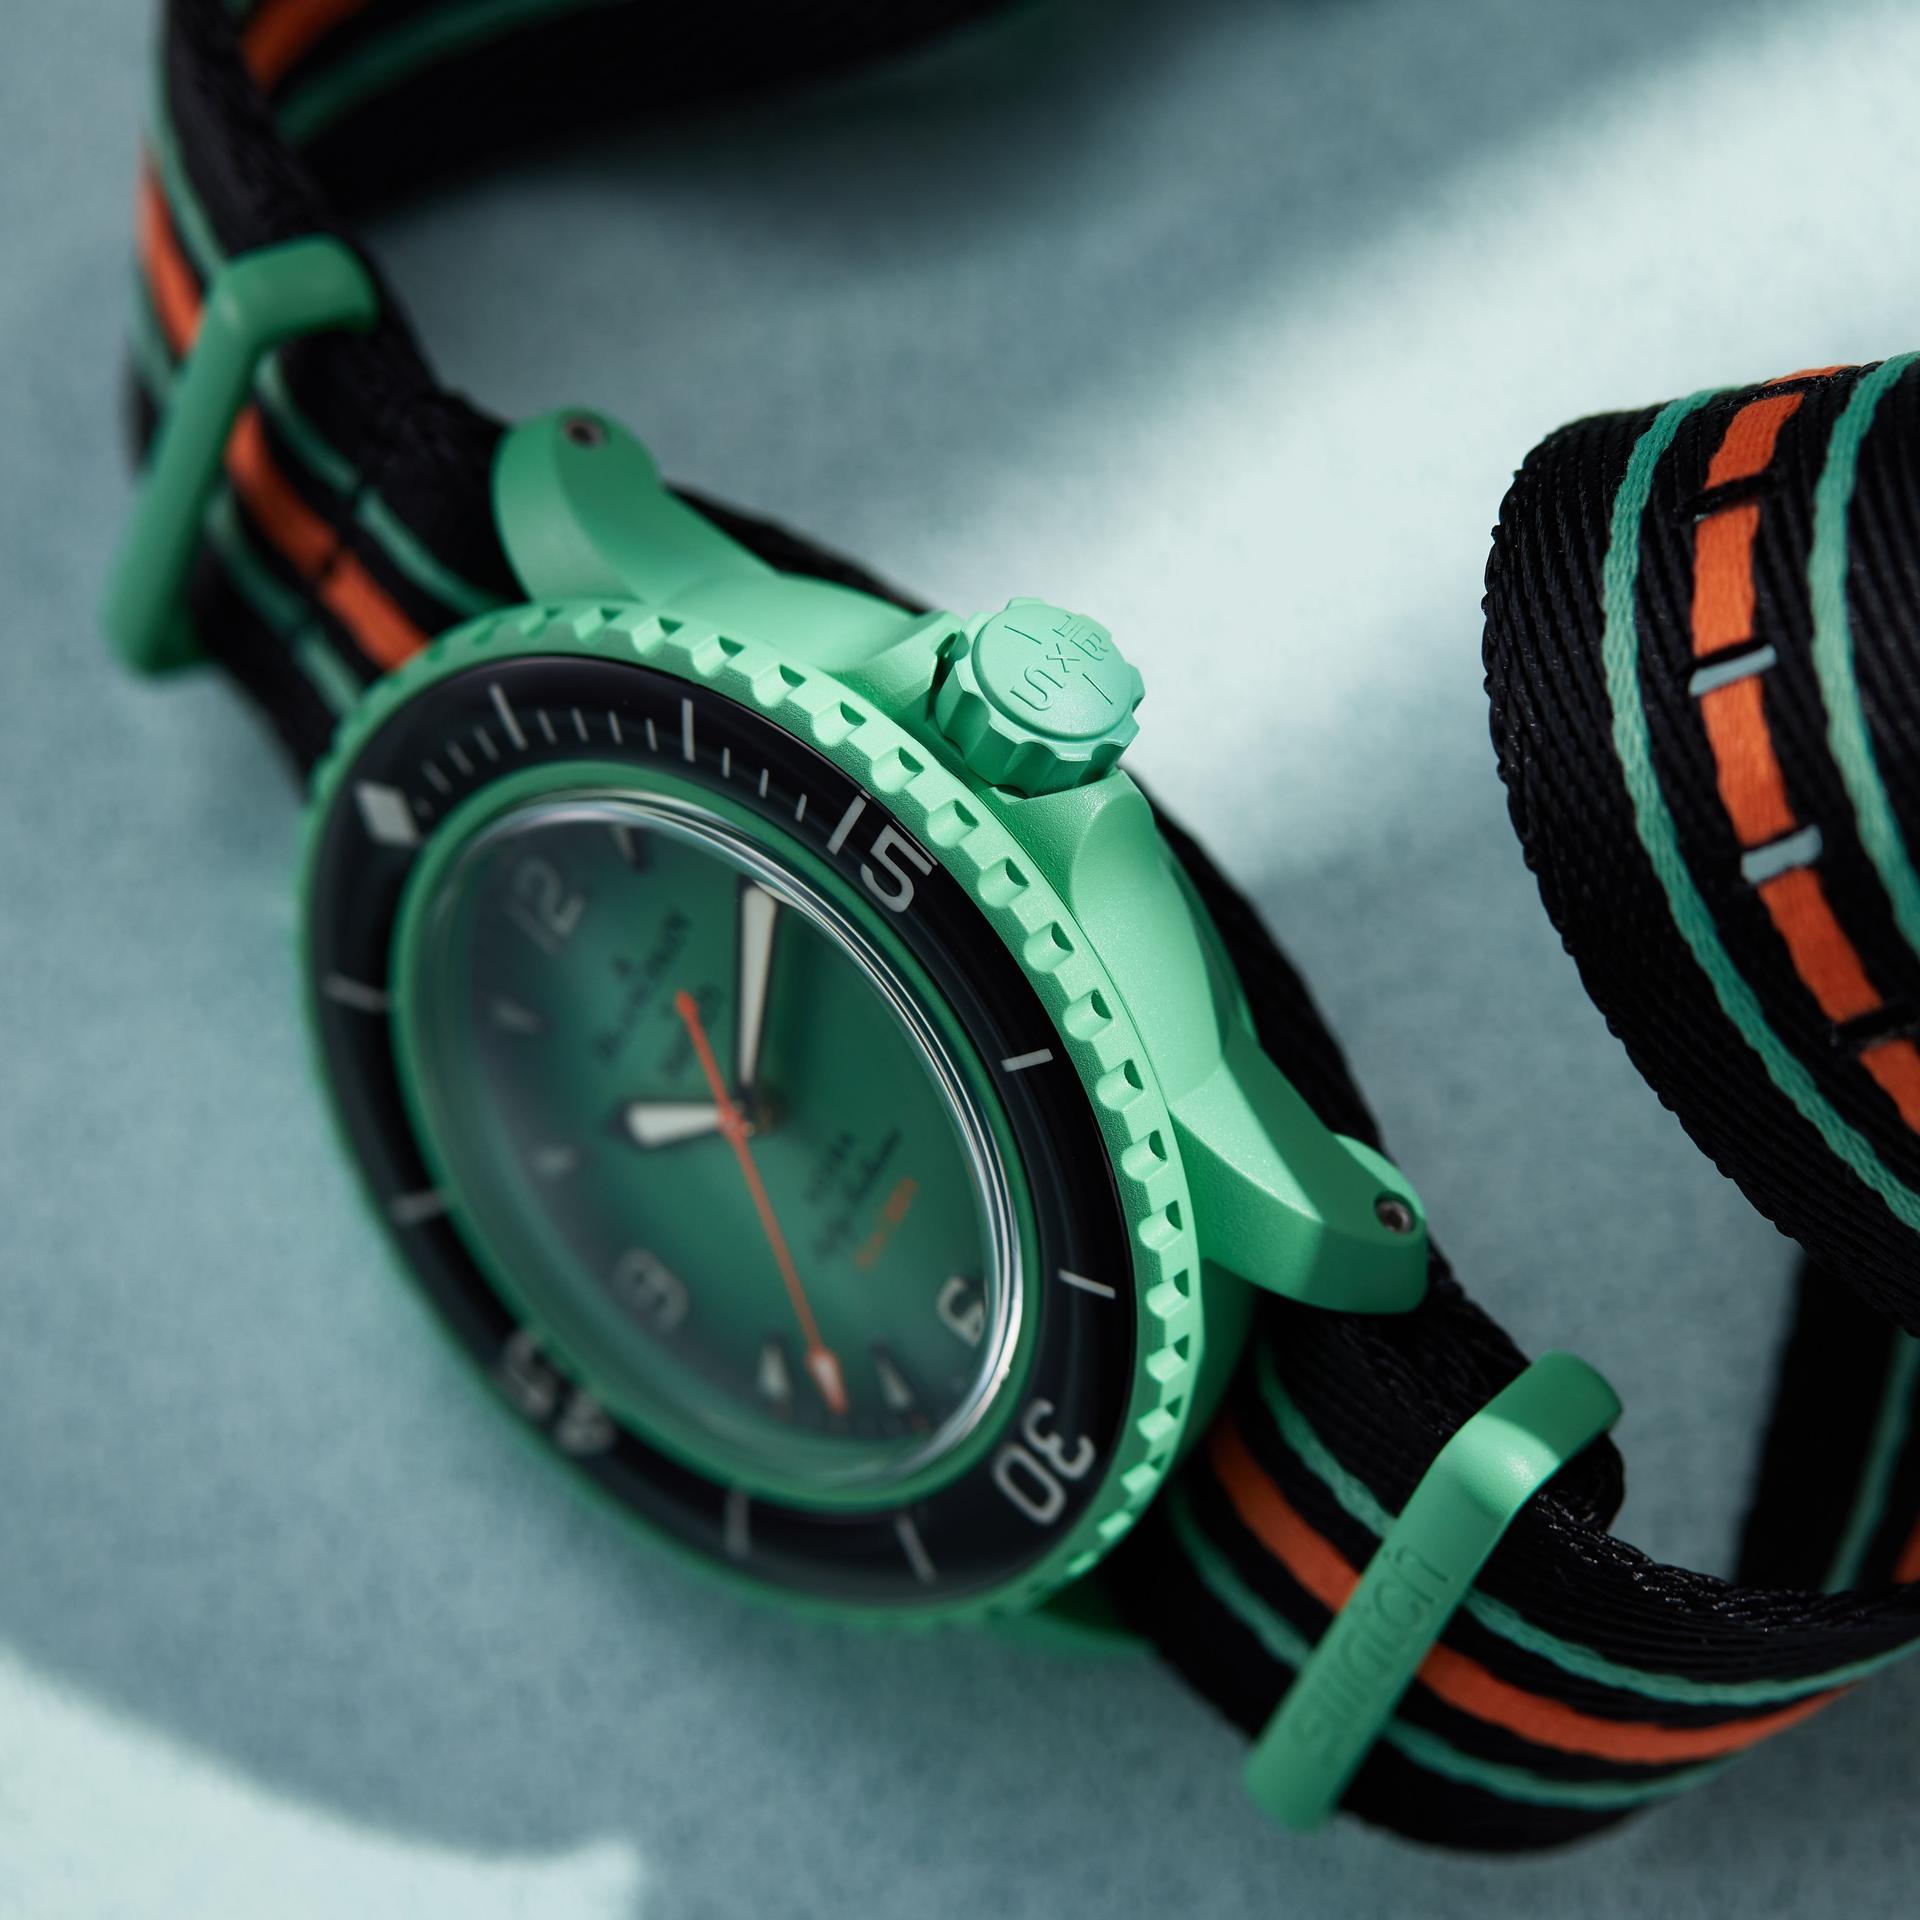 Blancpain X Swatch Fifty Fathoms Indian Ocean